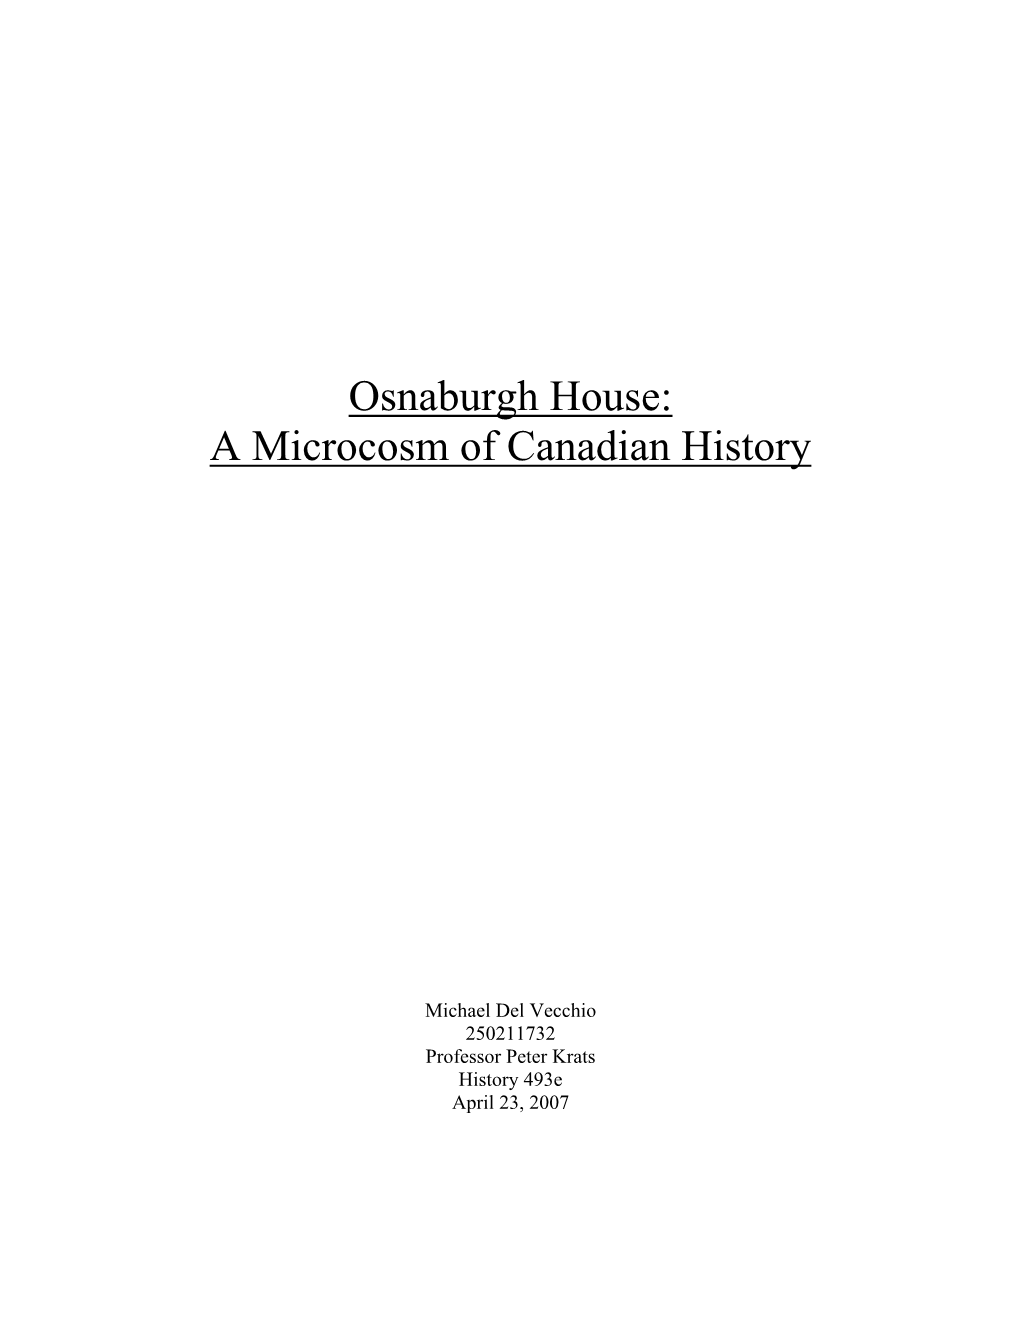 Osnaburgh House: a Microcosm of Canadian History